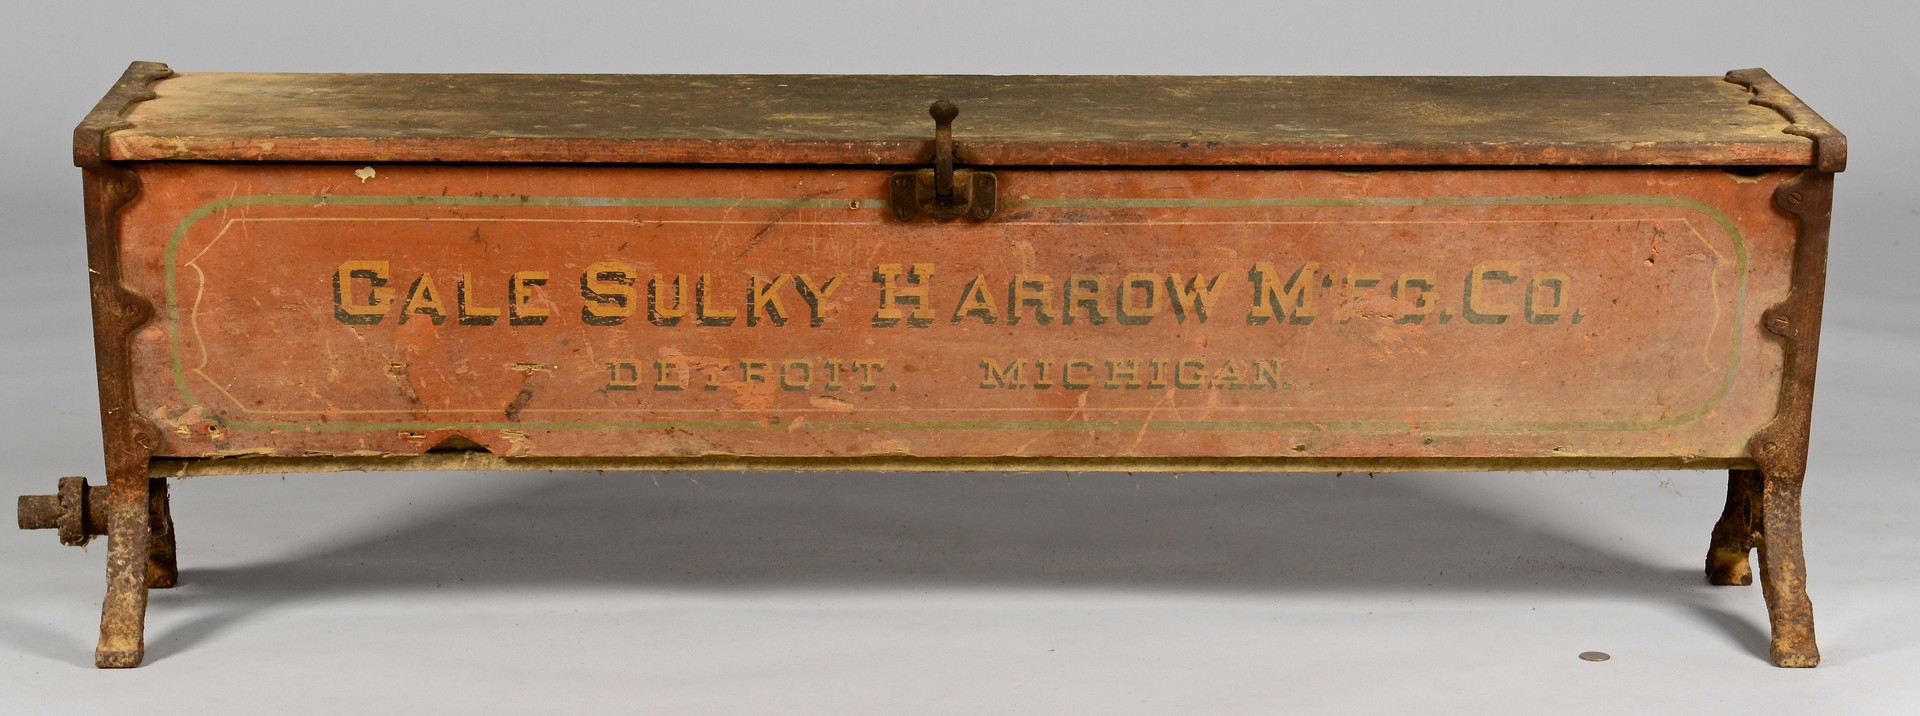 Lot 864: Hoosier Seed Drill Painted Advertising Bench